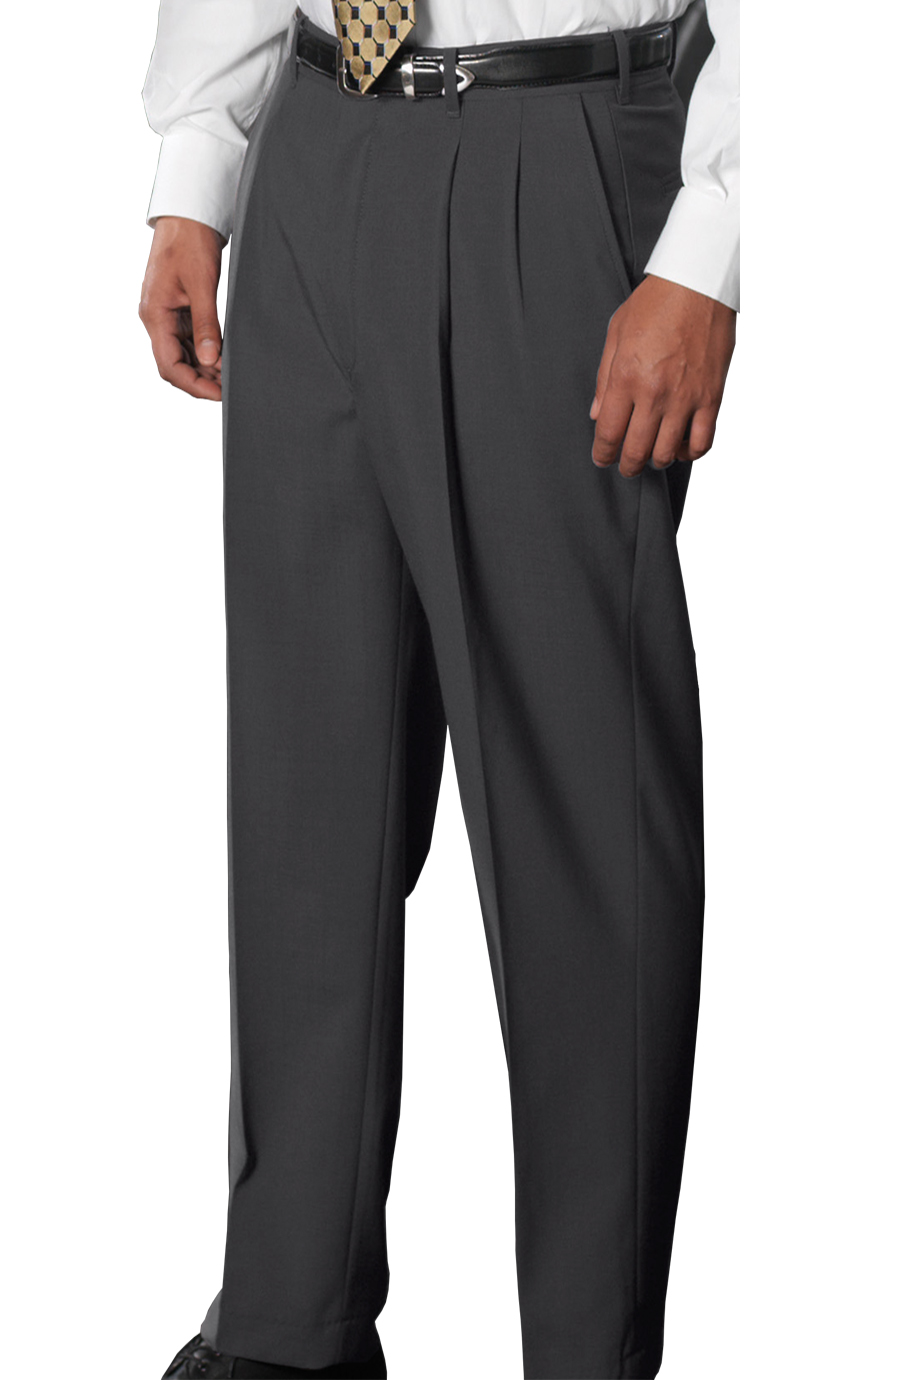 Edwards Big & Tall  Wool Blend Pleated Dress Pant - Online Exclusive